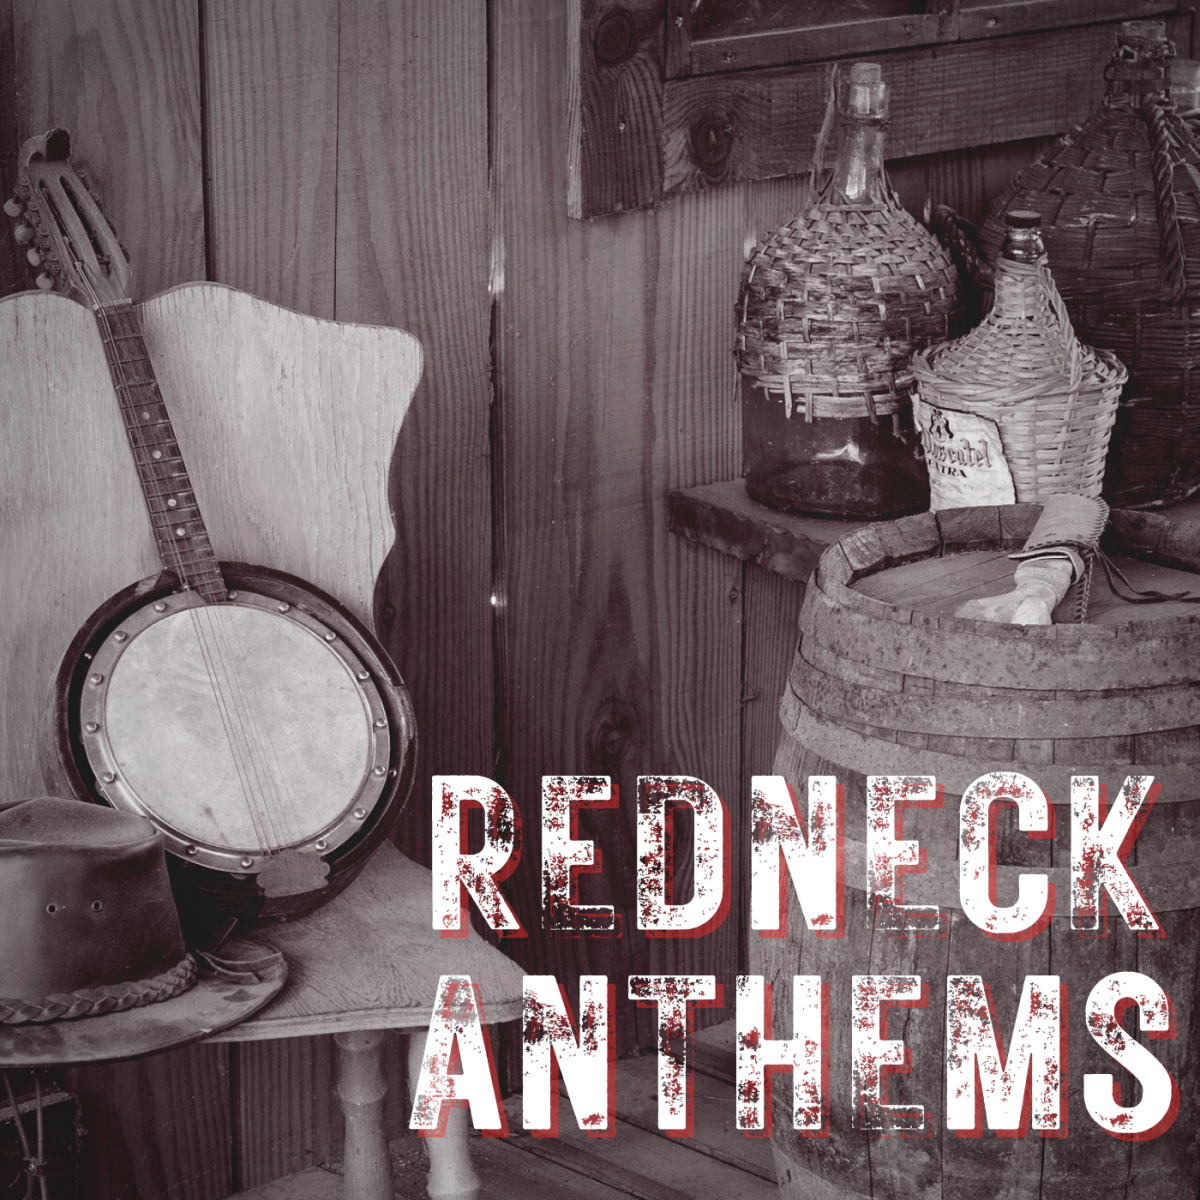 Proudly celebrate your redneck side with this Redneck Anthem playlist.  We've got a long list of country songs about rednecks and all the things they hold dear: honky tonks, trucks, working hard, drinkin', and tractors.